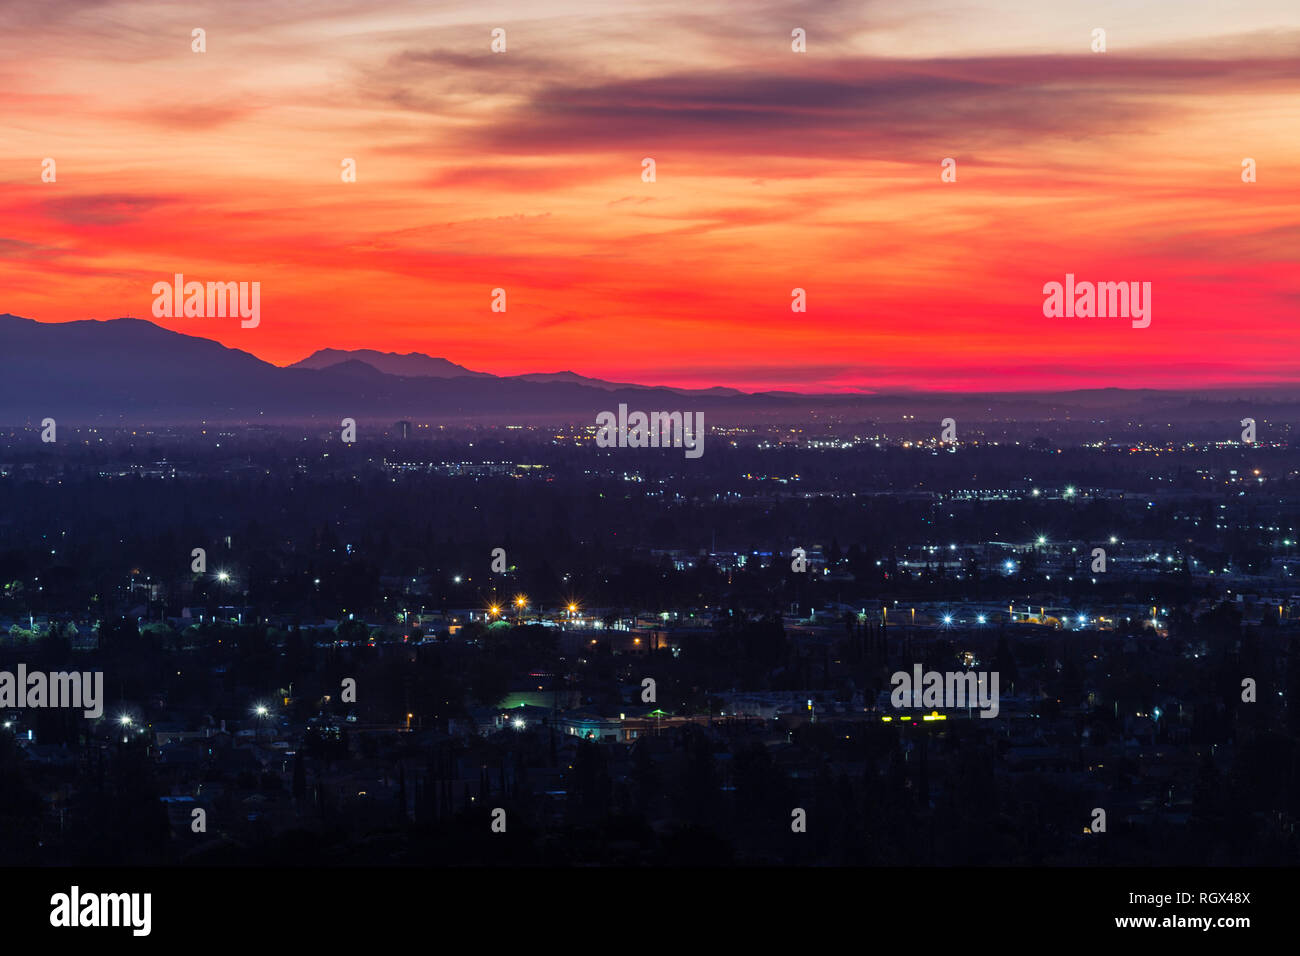 Colorful predawn view of San Fernando Valley neighborhoods and the San Gabriel Mountains in the city of Los Angeles, California. Stock Photo